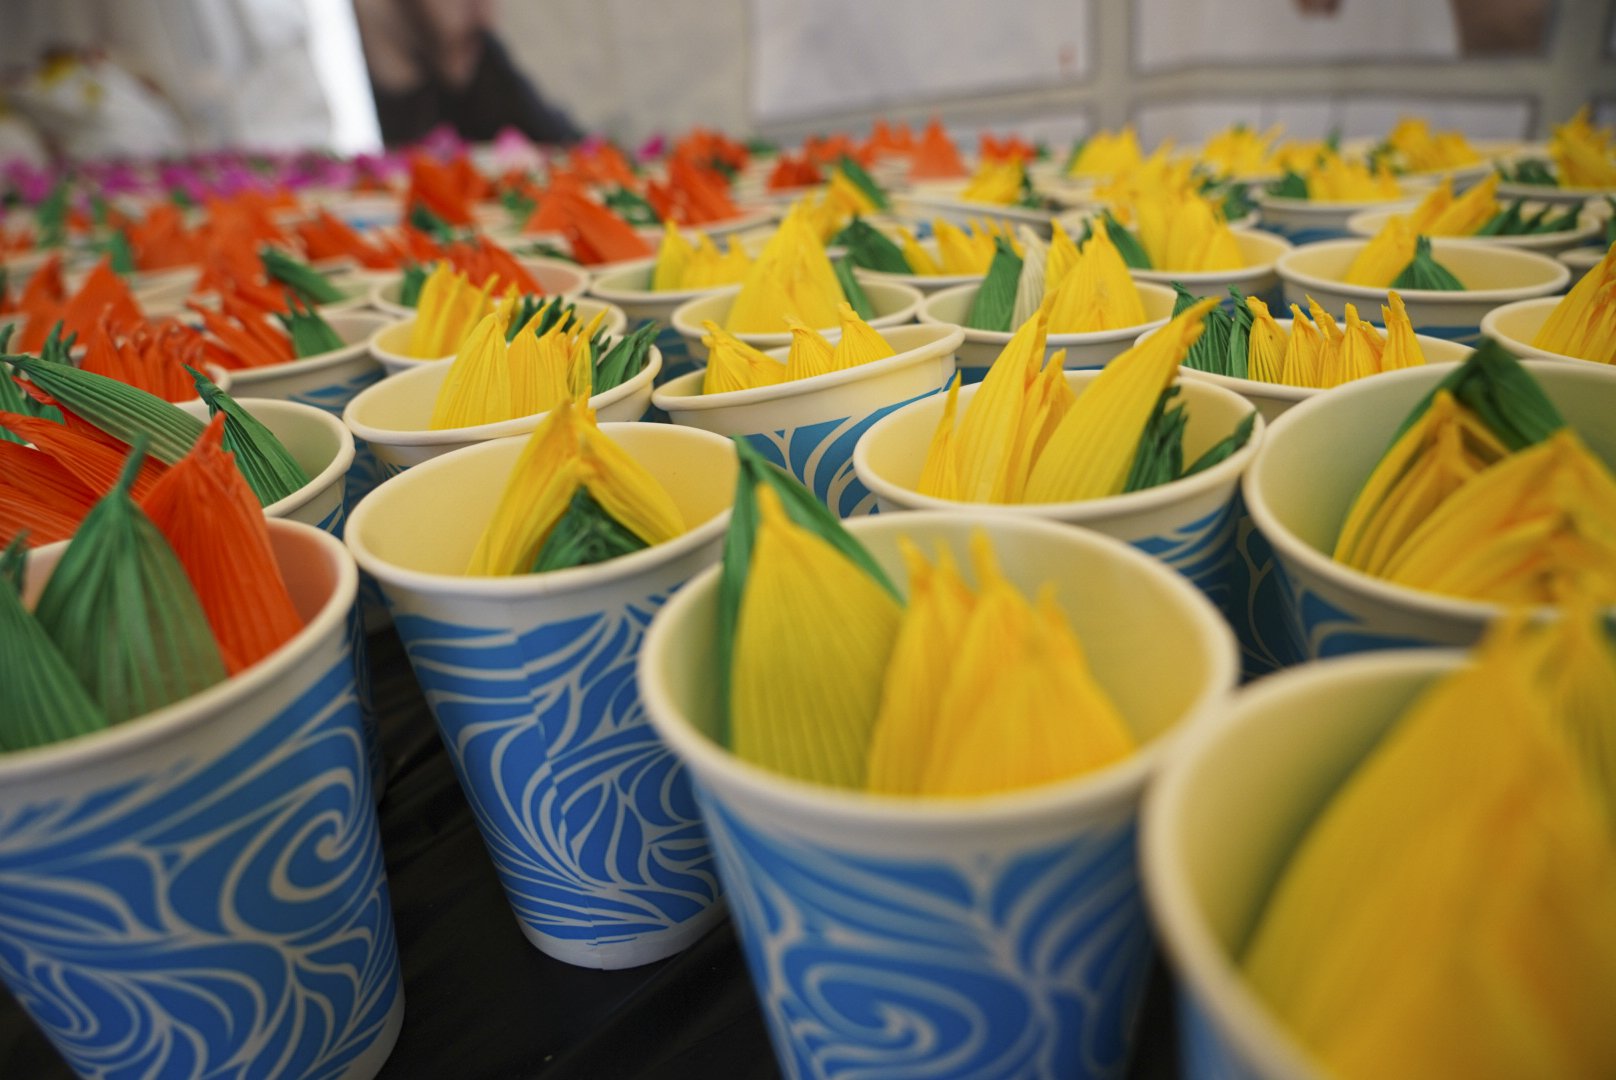  Paper lotus flowers await assembly during the 49th annual Los Angeles Korean Festival Friday, September 23 2022 at the Seoul International Park. Papercraft is a traditional Korean art often used to construct intricite lanterns.  (The Corsair | Antho